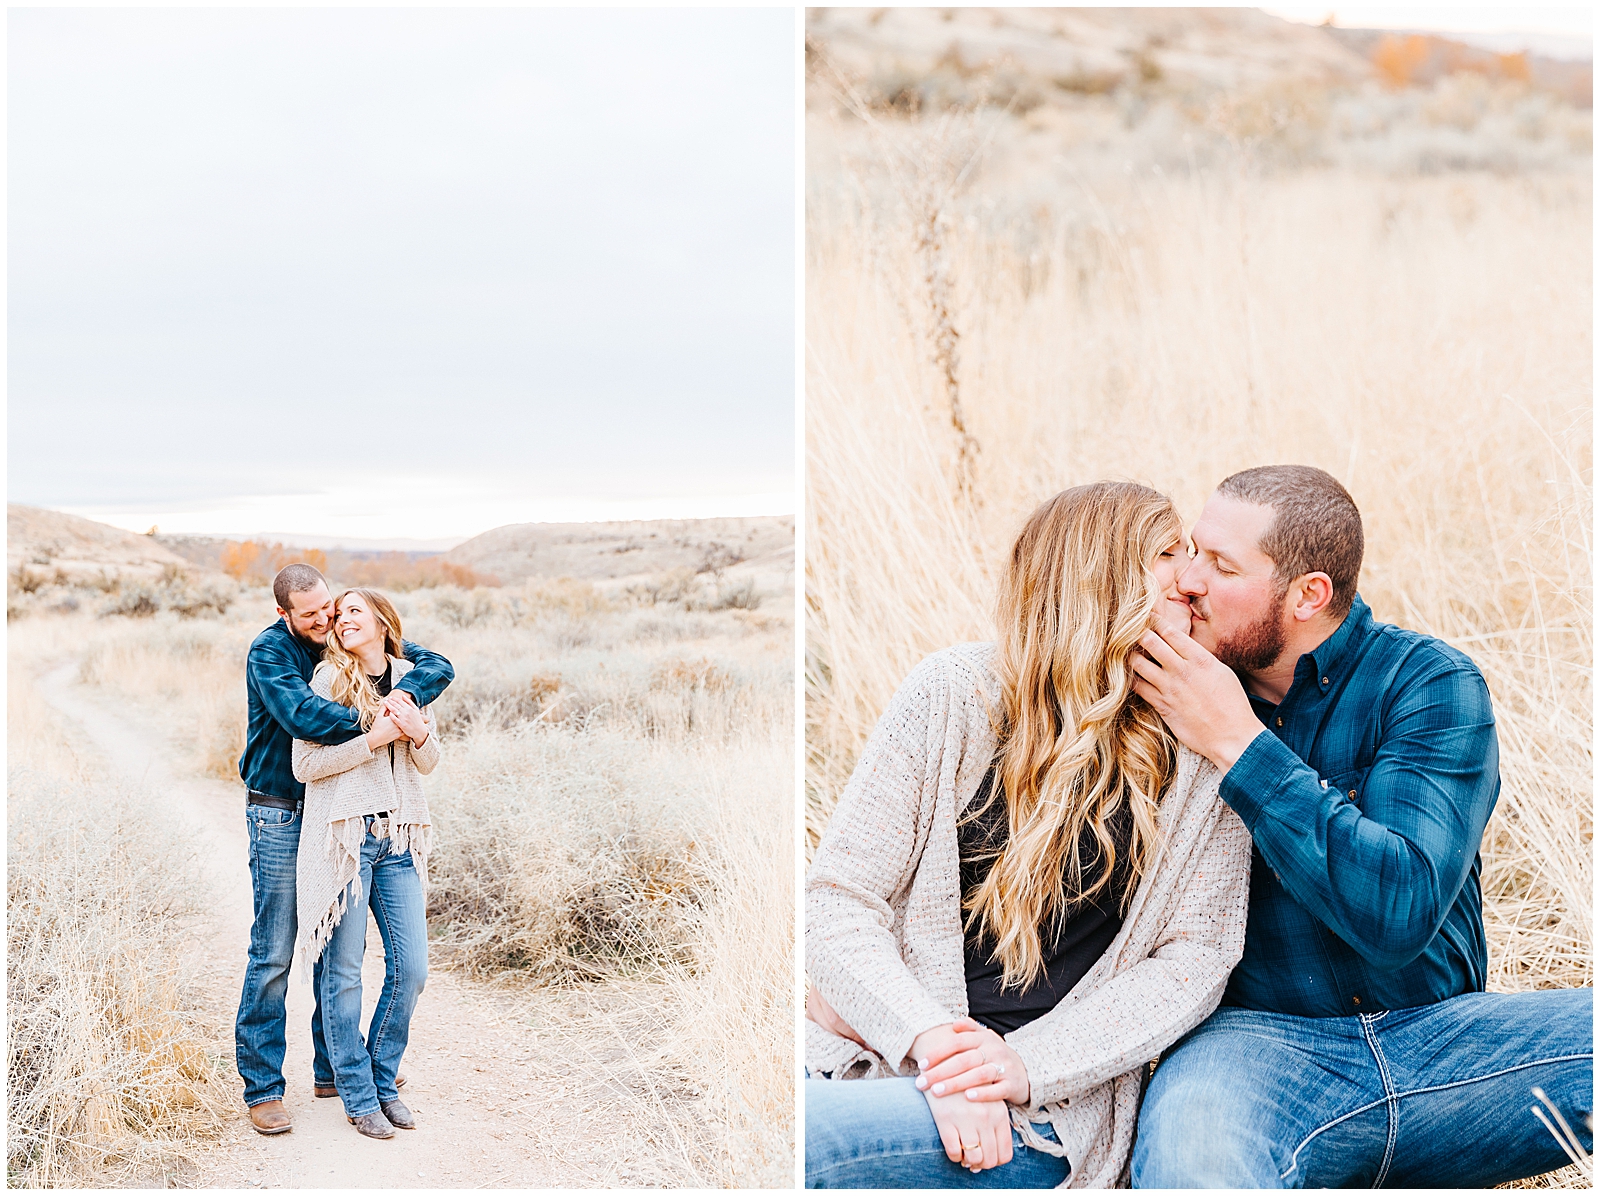 October Foothills Rustic Engagement Photos